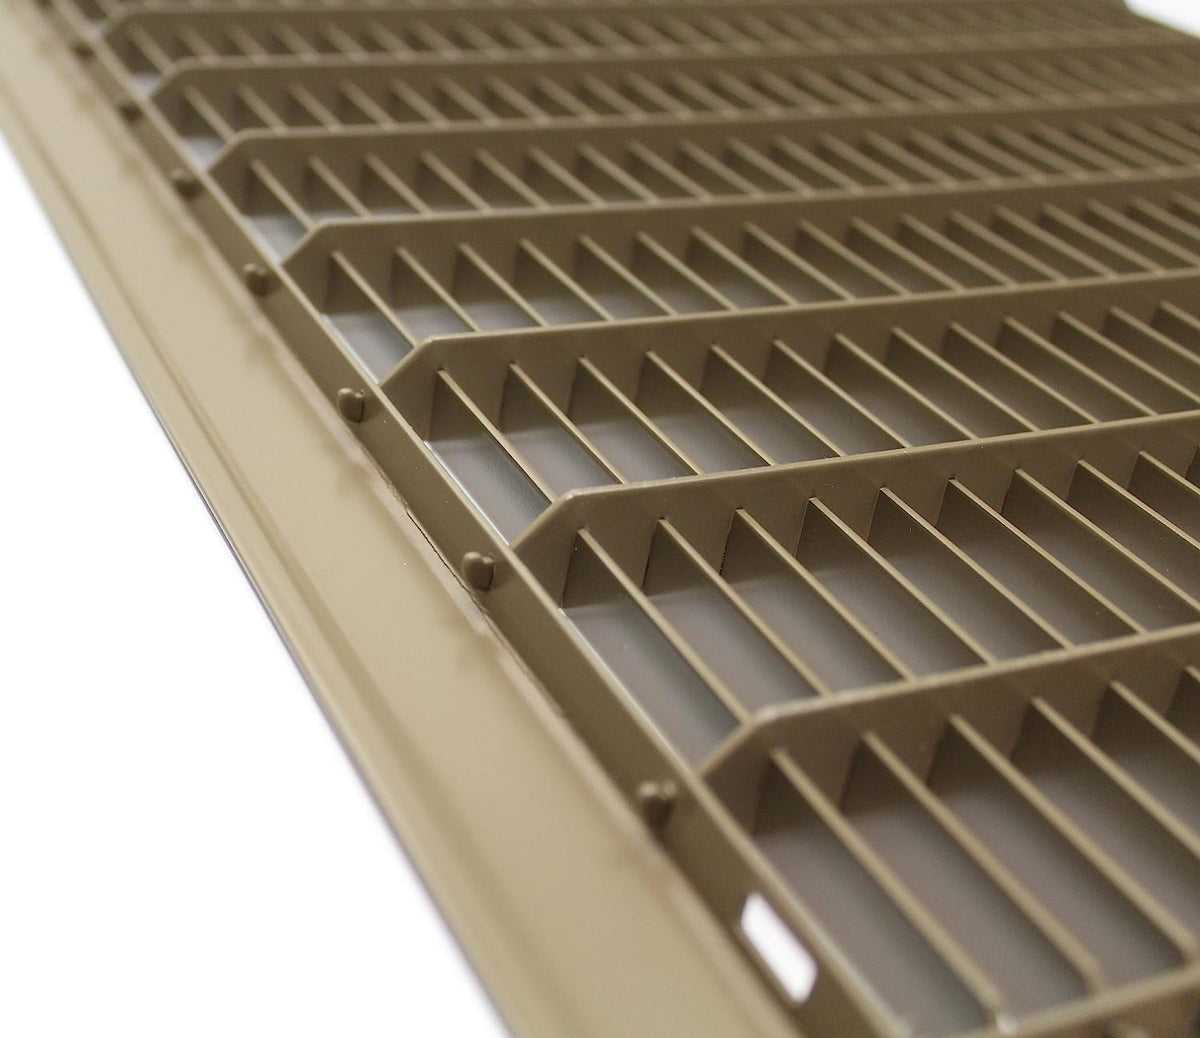 10&quot; X 14&quot; or 14&quot; X 10&quot; Heavy Duty Floor Grille - Fixed Blades Air Grille - Brown [Outer Dimensions: 11.75 X 15.75]